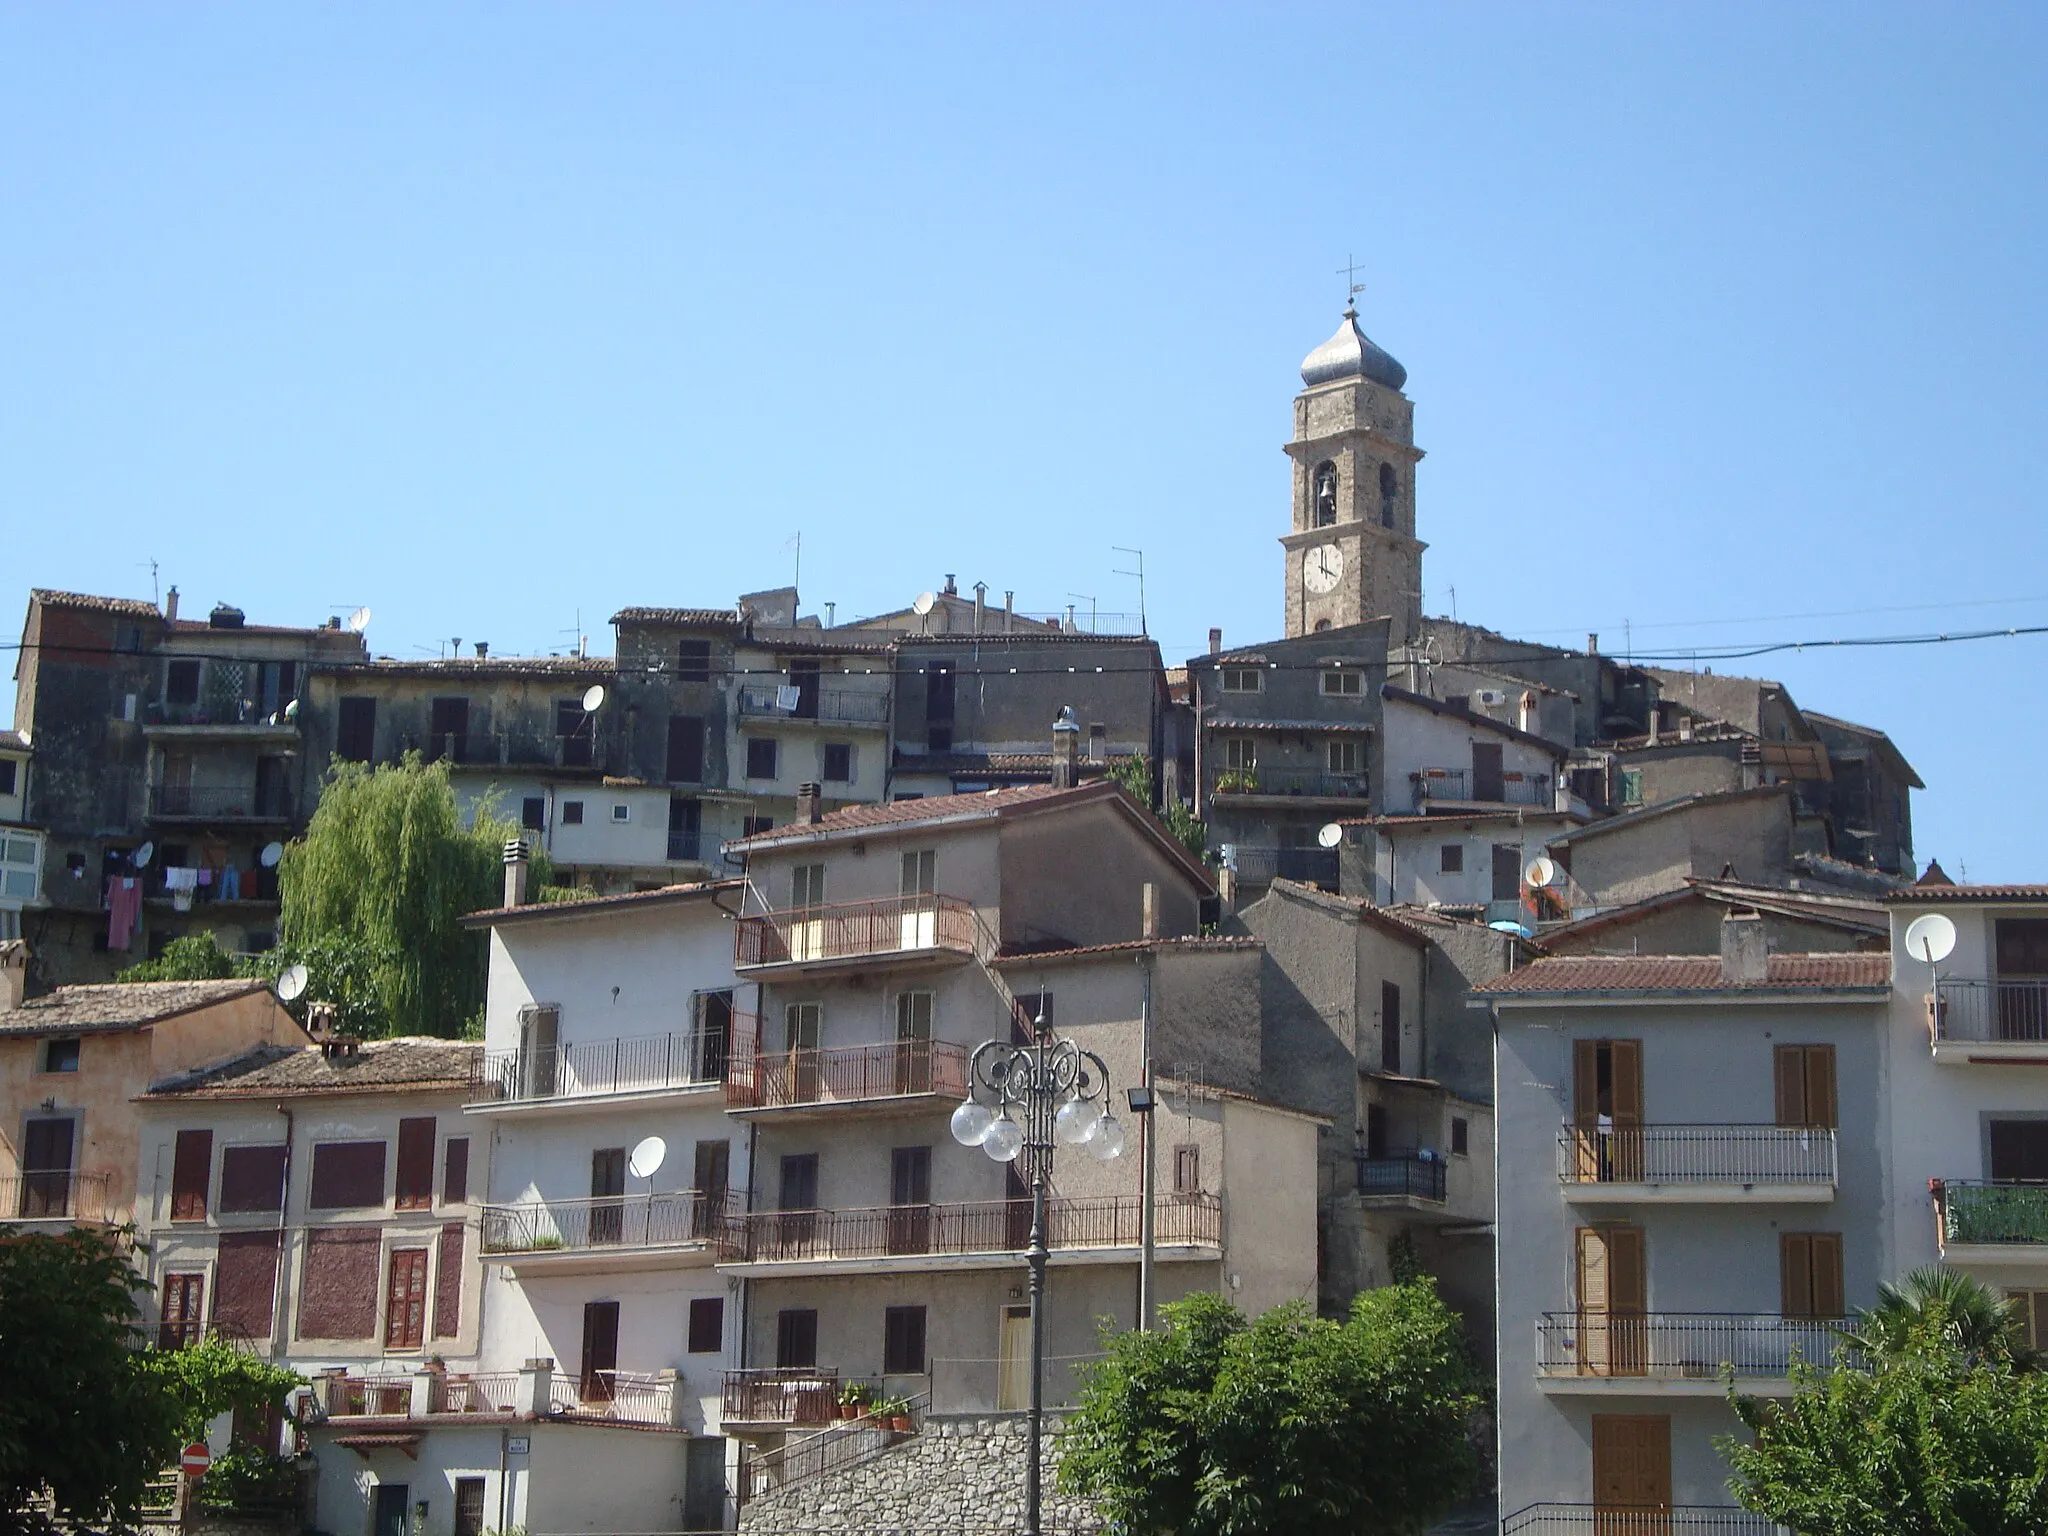 Photo showing: View of Agosta in the Lazio region of Italy